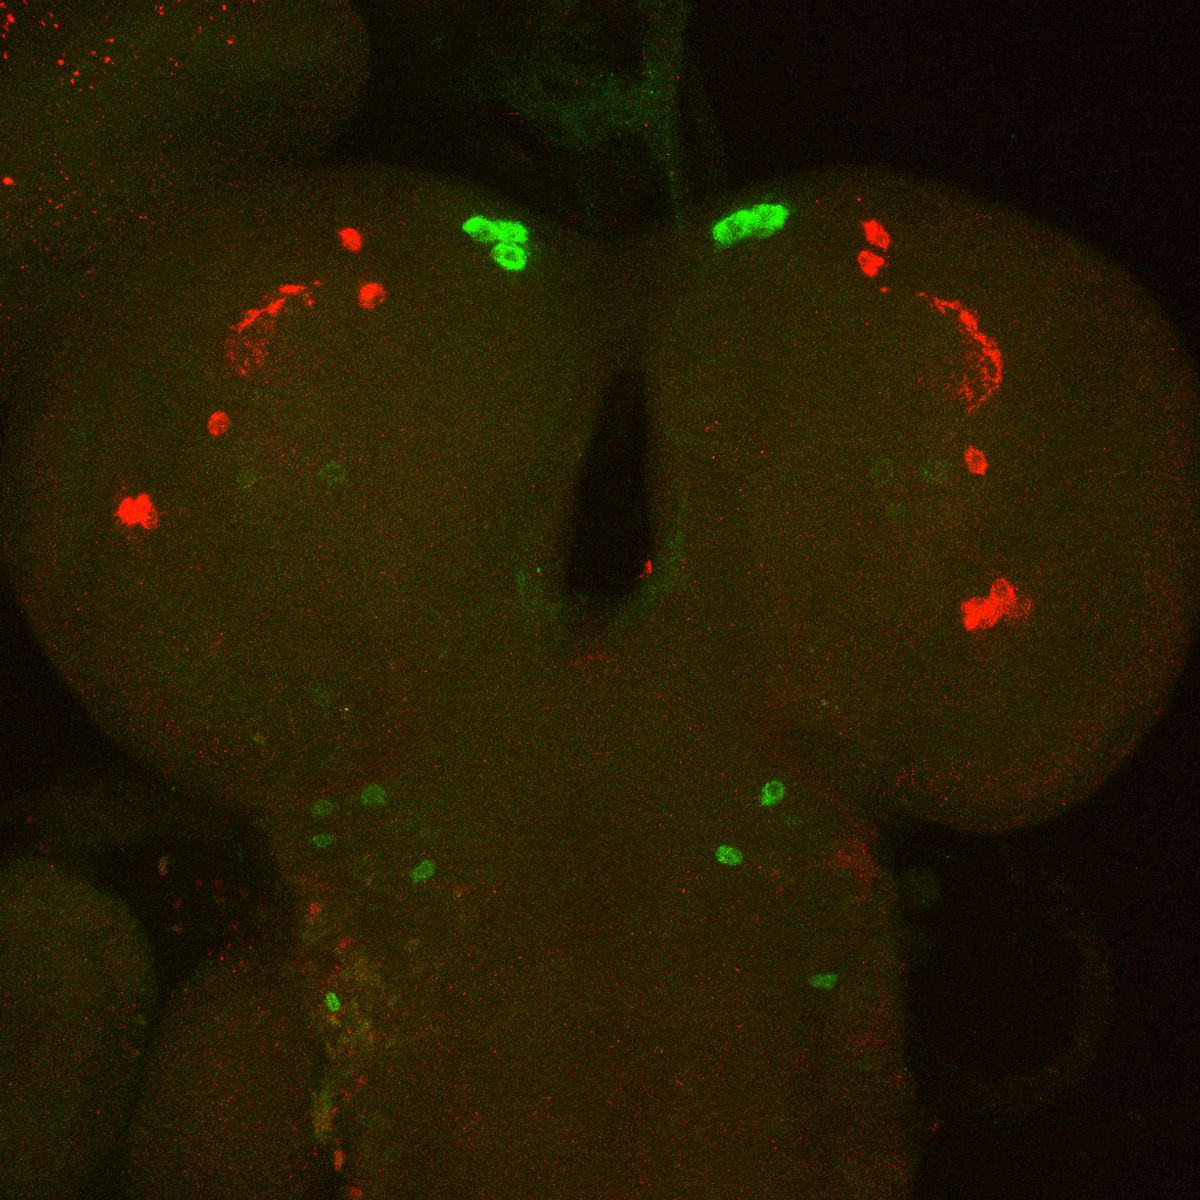 A confocal microscopy image of a larval fly brain lobes shows that arousal neurons, labeled in green, are concentrated at the top of the lobe and clock neurons, labeled in red, extend down the far side of the lobe away from the center and arousal neurons.